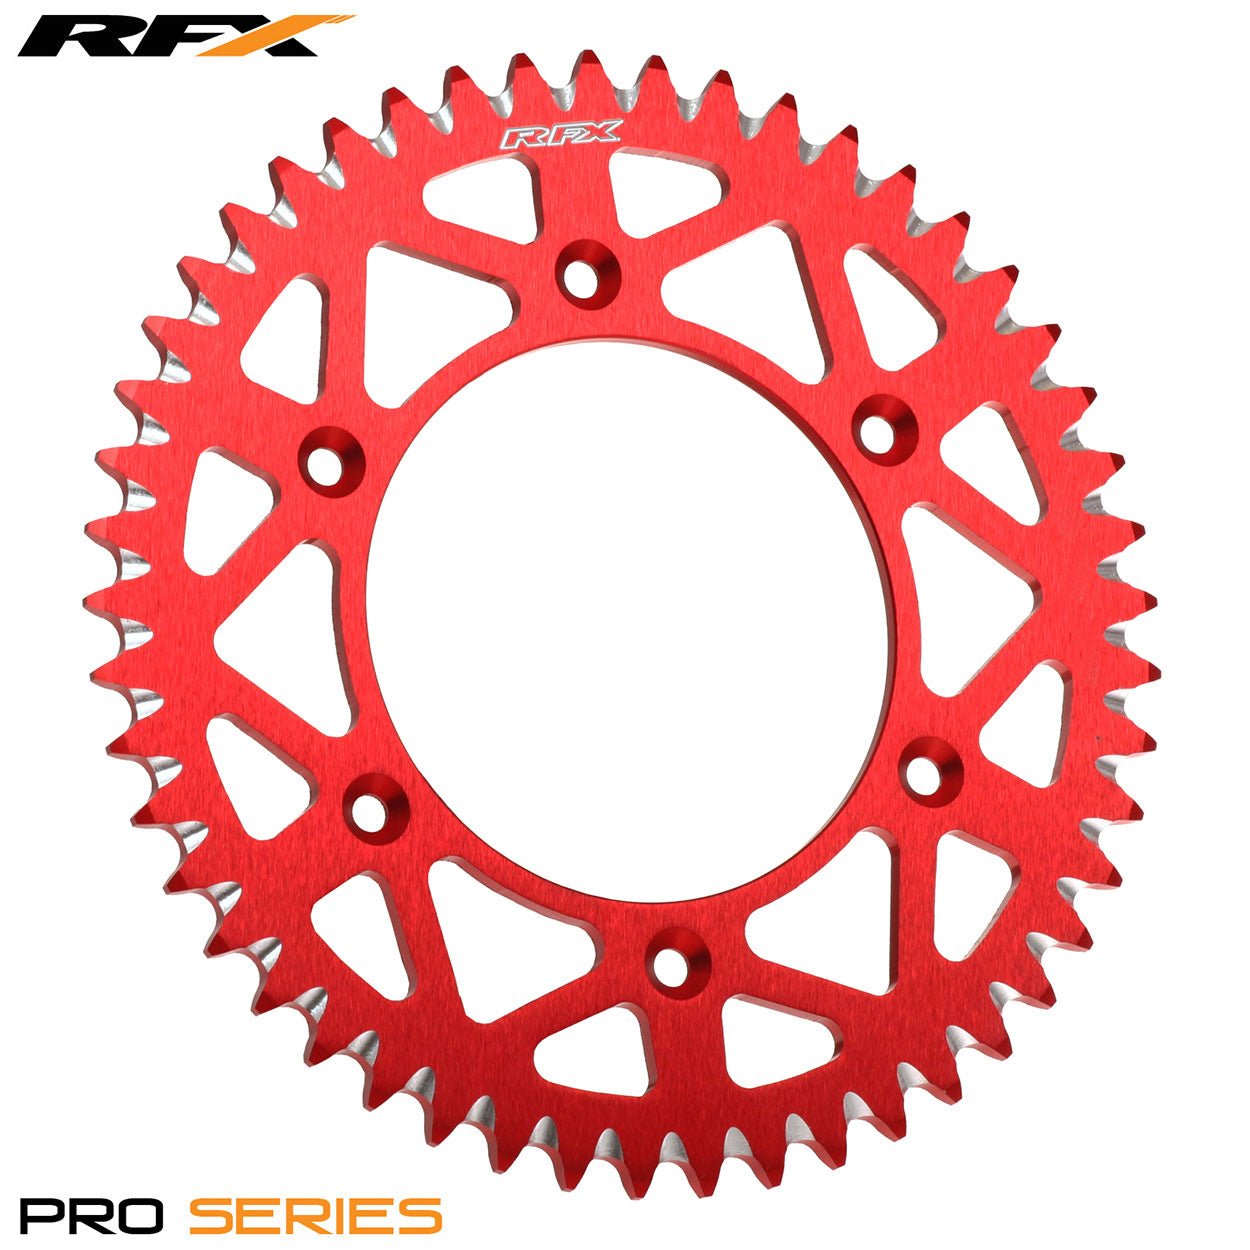 RFX Pro Series Elite Rear Sprocket Husqvarna 125-610 Up To 2013 Gas Gas EC125-300 All Years (Red 50T - Red - RFX